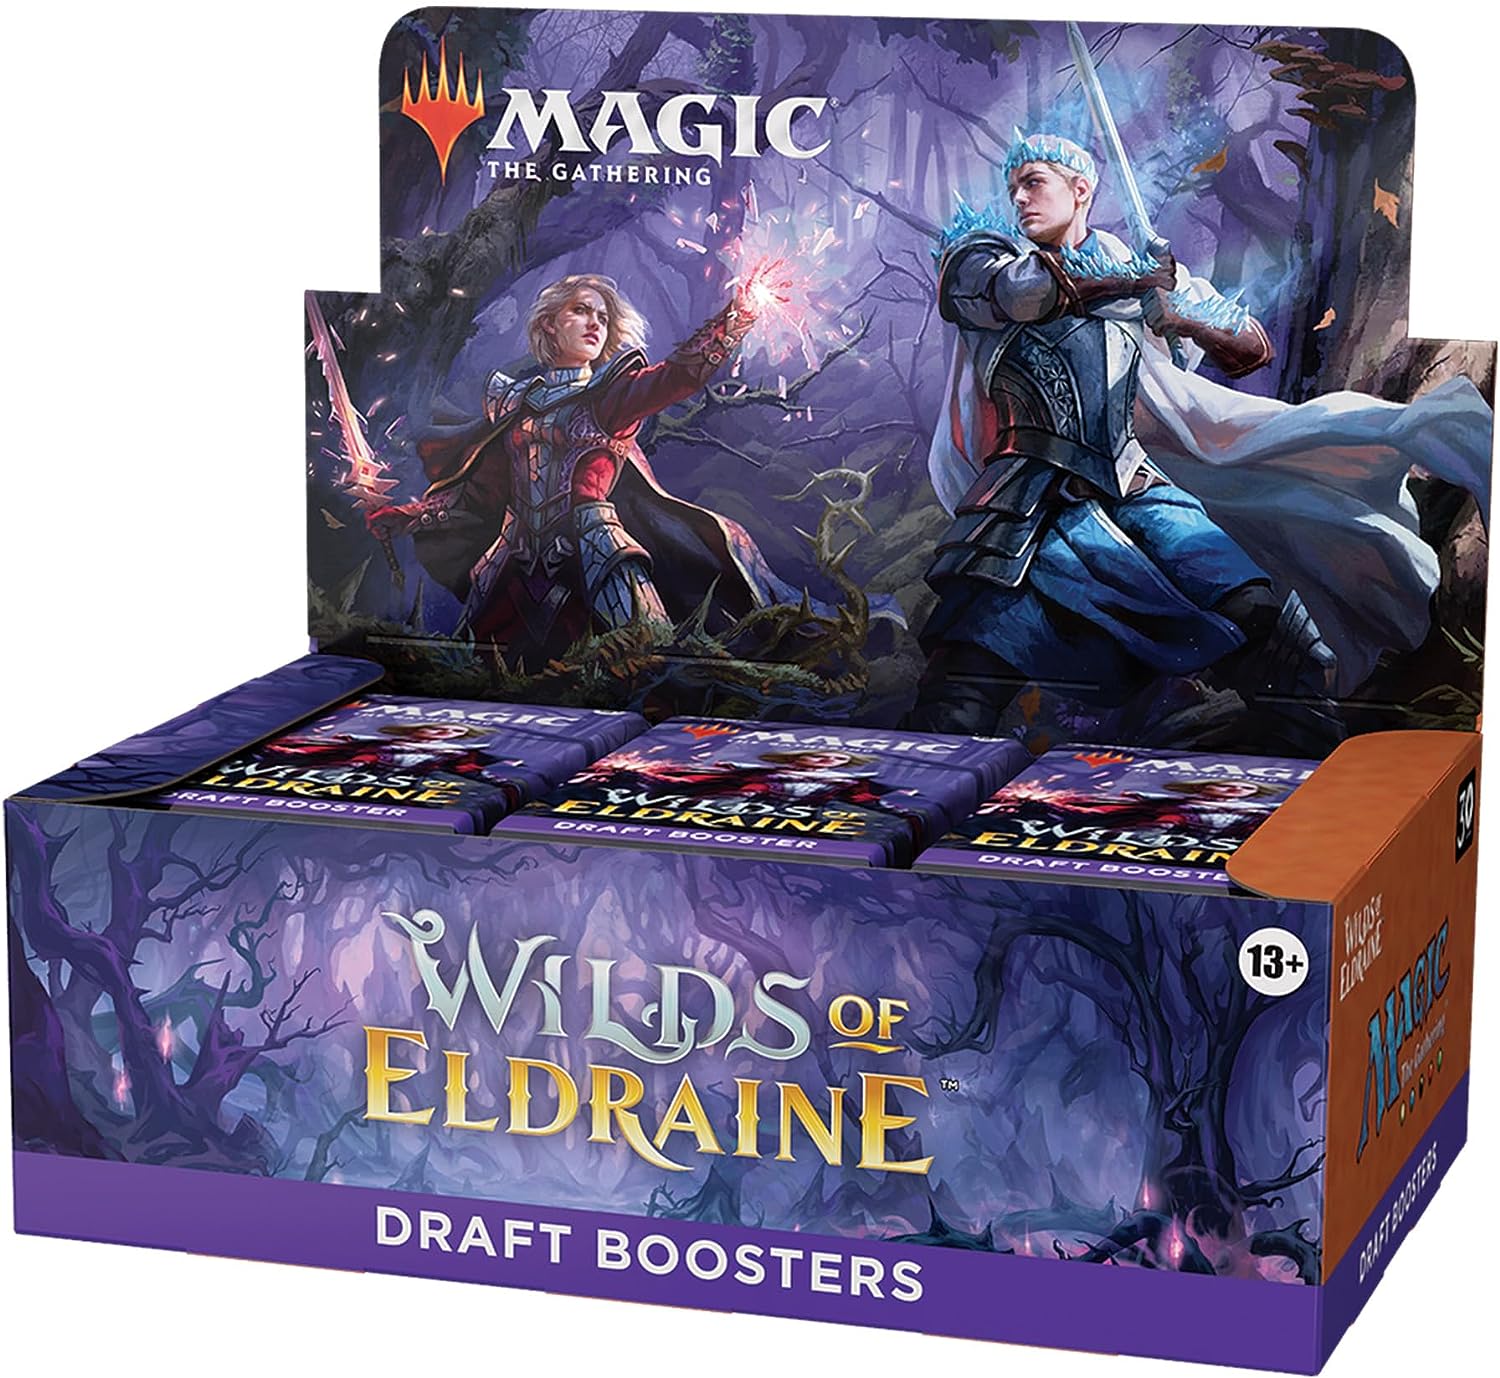 Magic The Gathering Wilds of Eldraine Draft Booster Box | CCGPrime